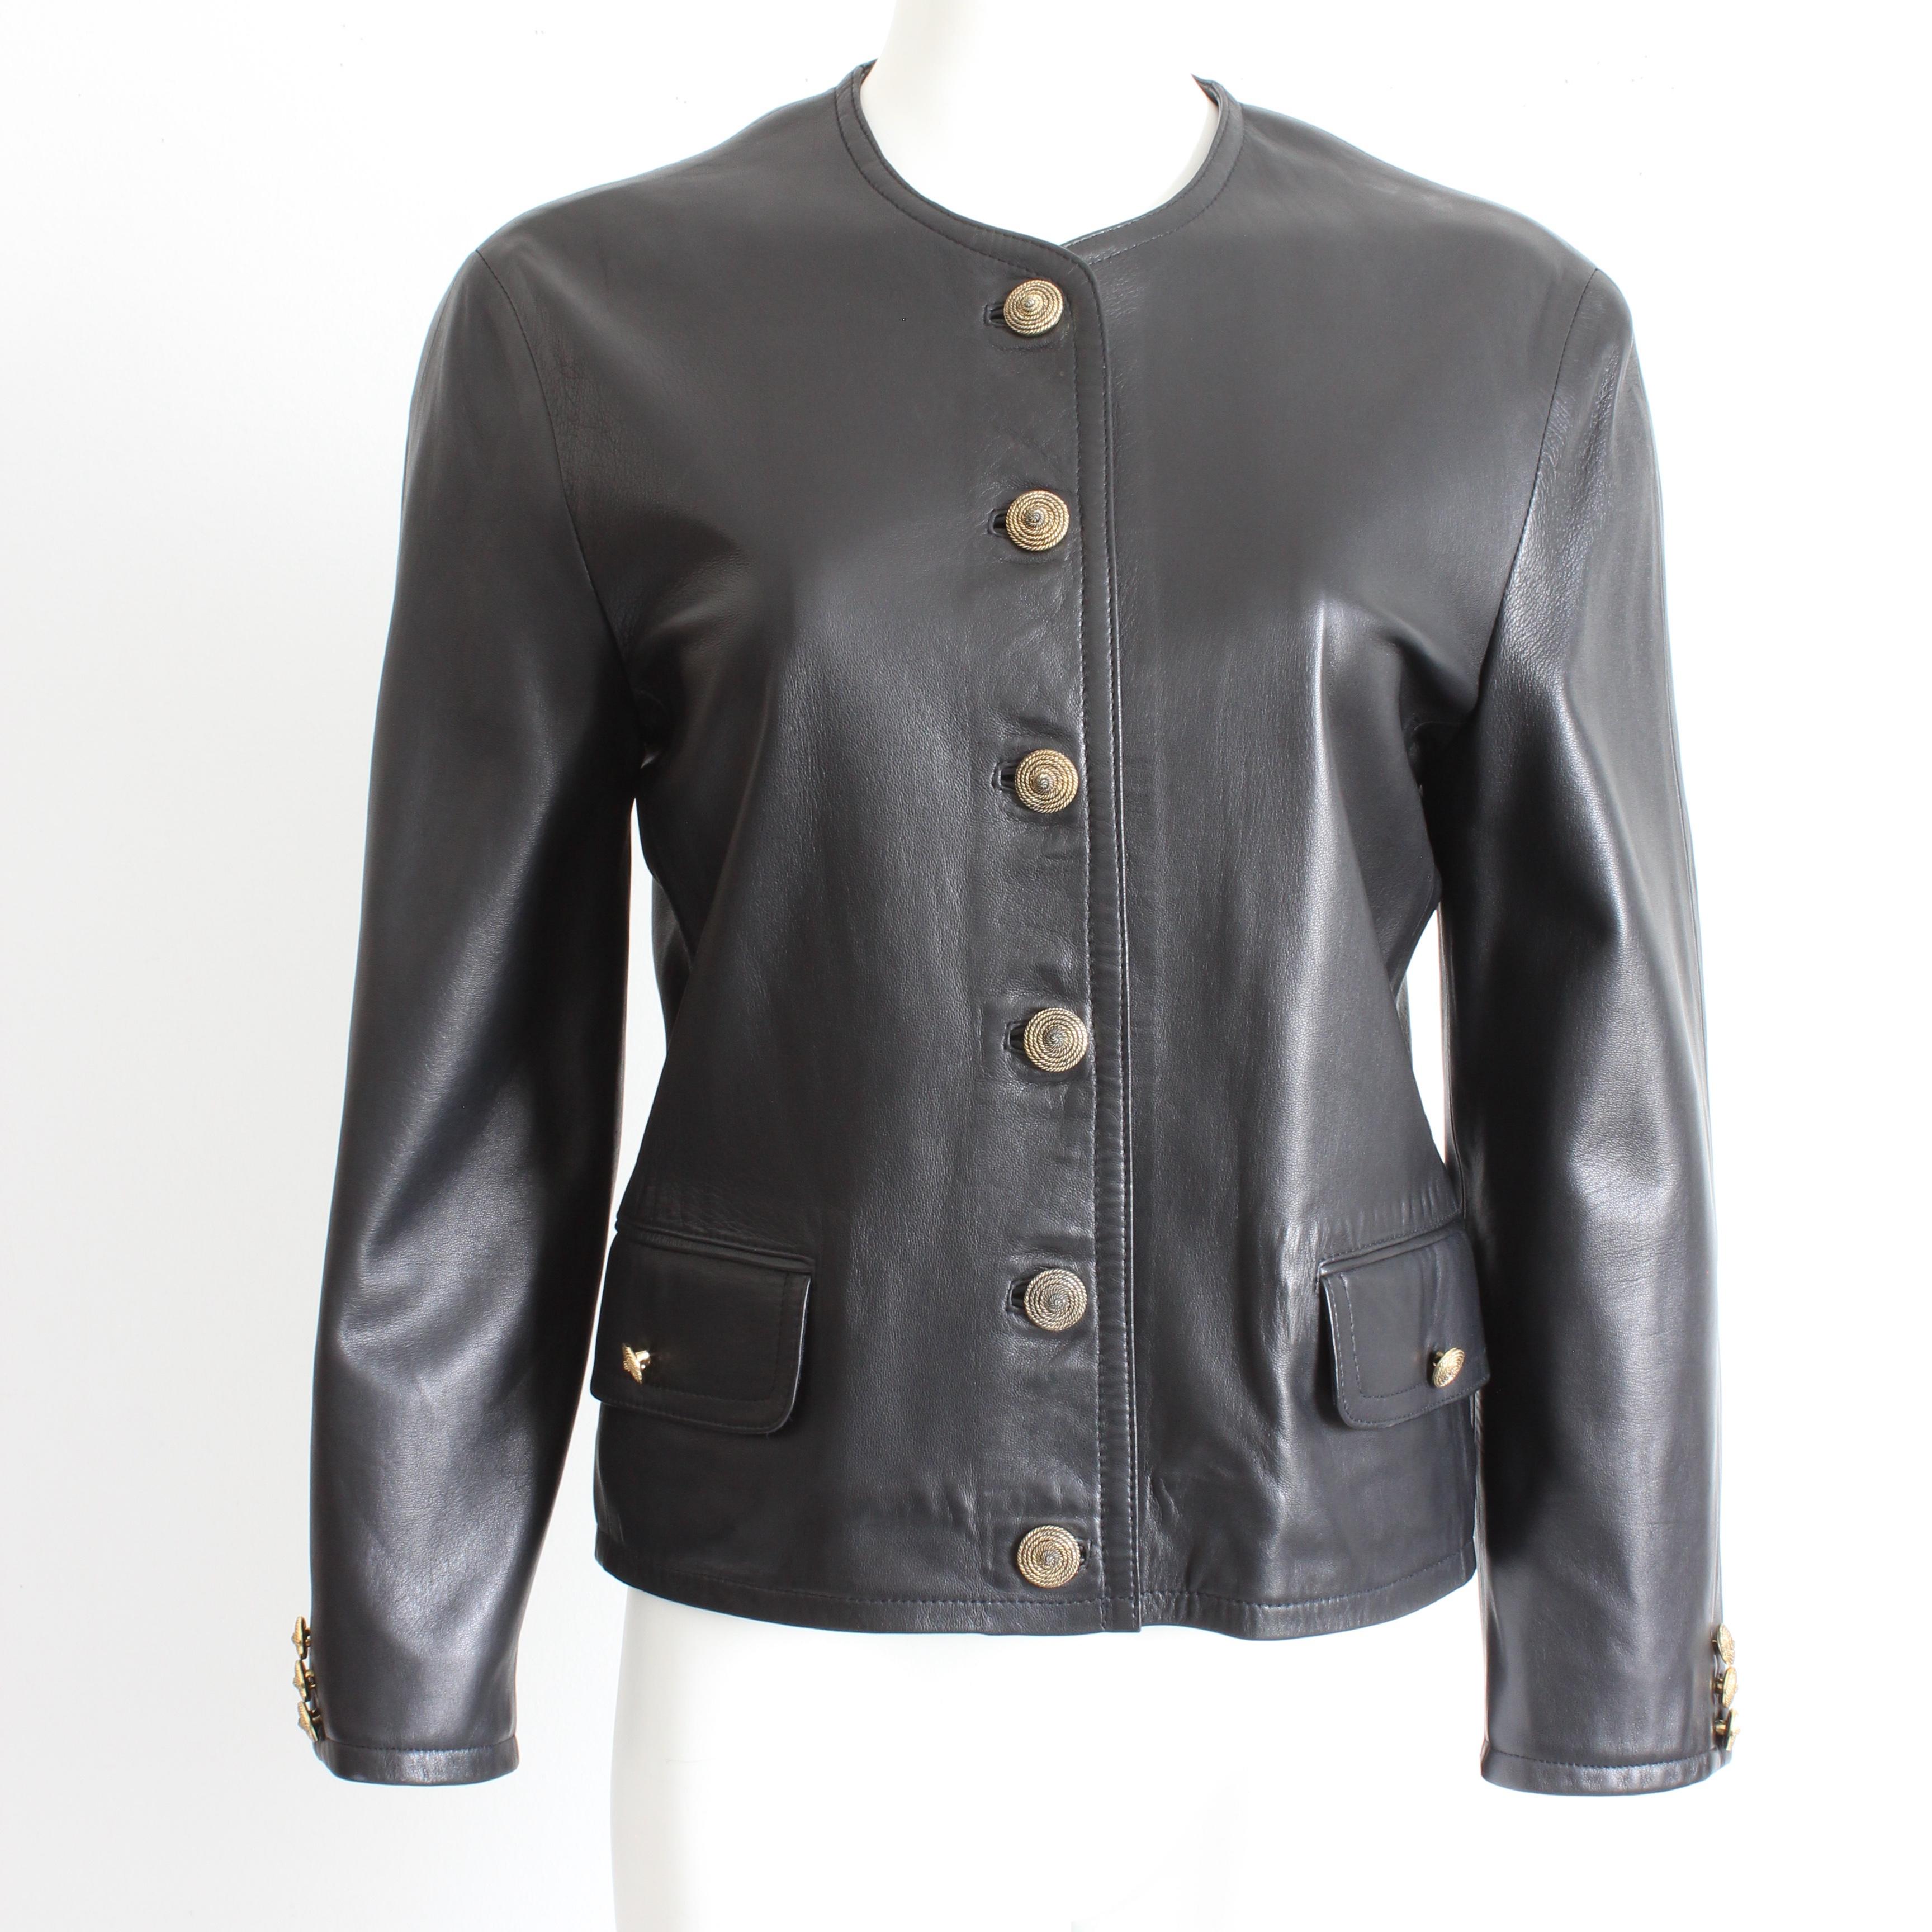 This chic black leather jacket was made by Maus & Hoffman, a high-end Florida department store that's been selling quality-made goods for more than 80 years.  

Made from supple black leather, this light weight jacket features a jewel neckline,